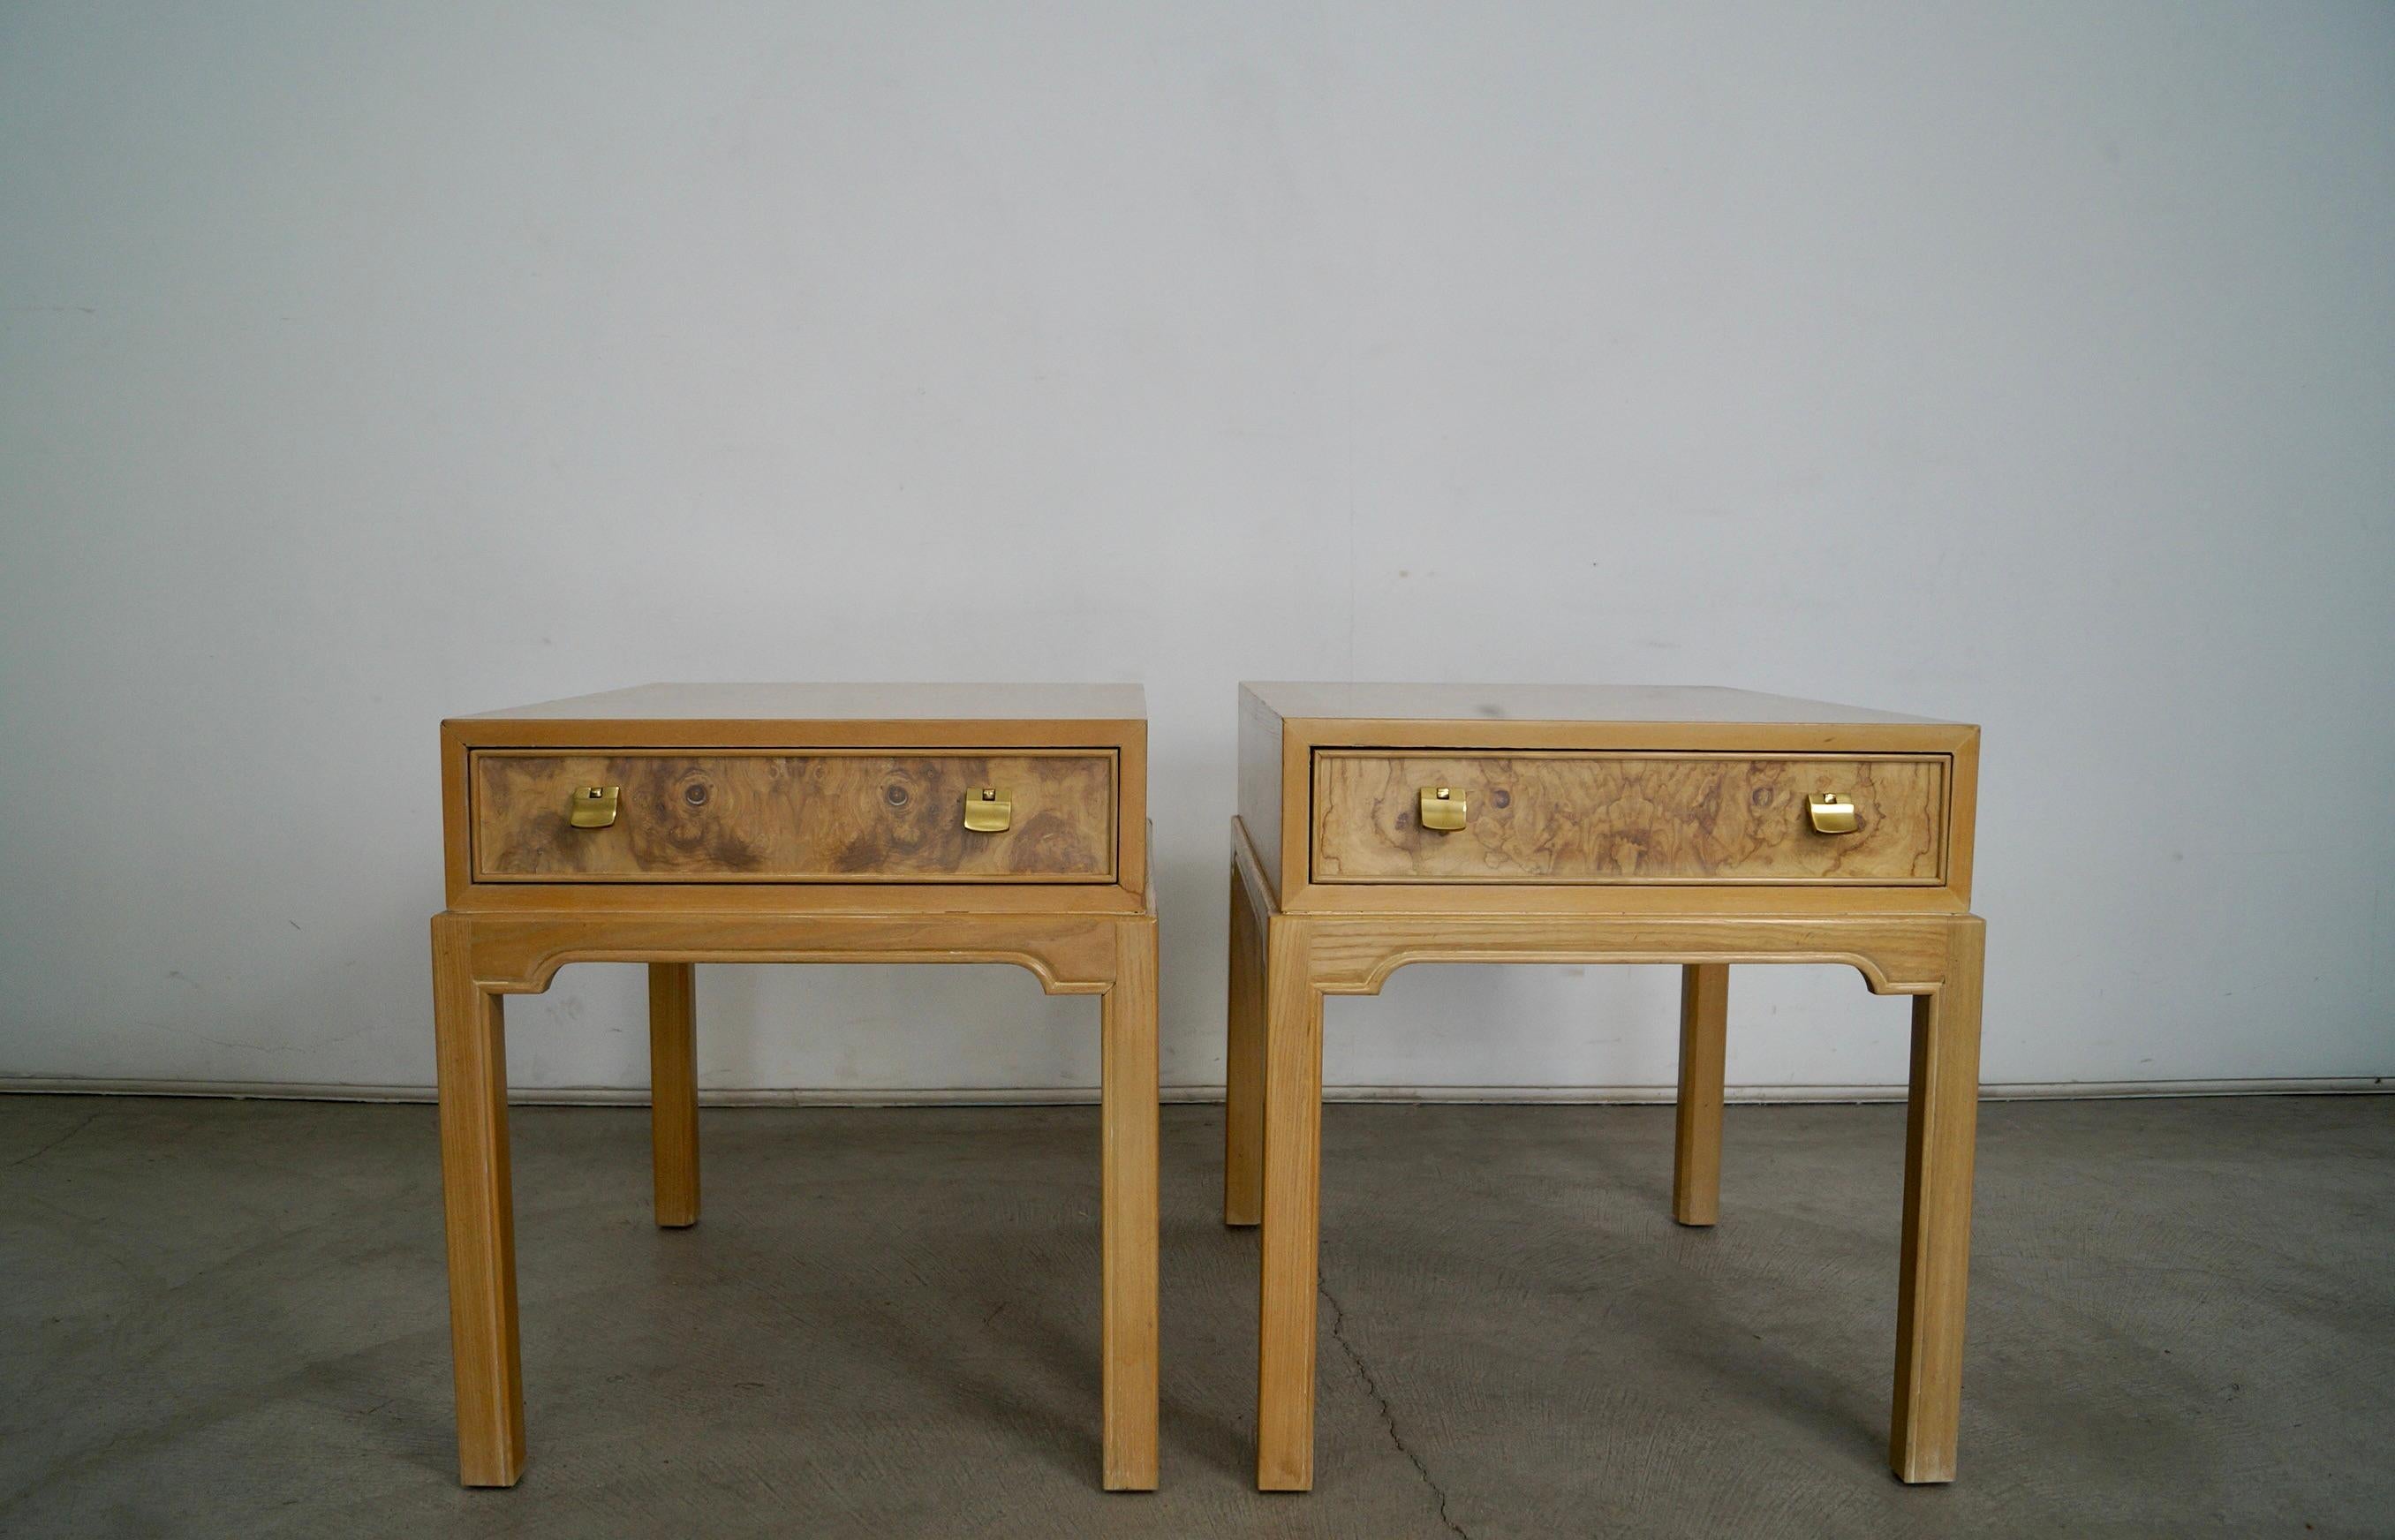 Pair of vintage high-end side tables for sale. Manufactured by designer company Drexel Heritage, and part of the Corinthian Collection. These end tables are rare, and are in incredible condition. They have the original bleached burl wood finish, and